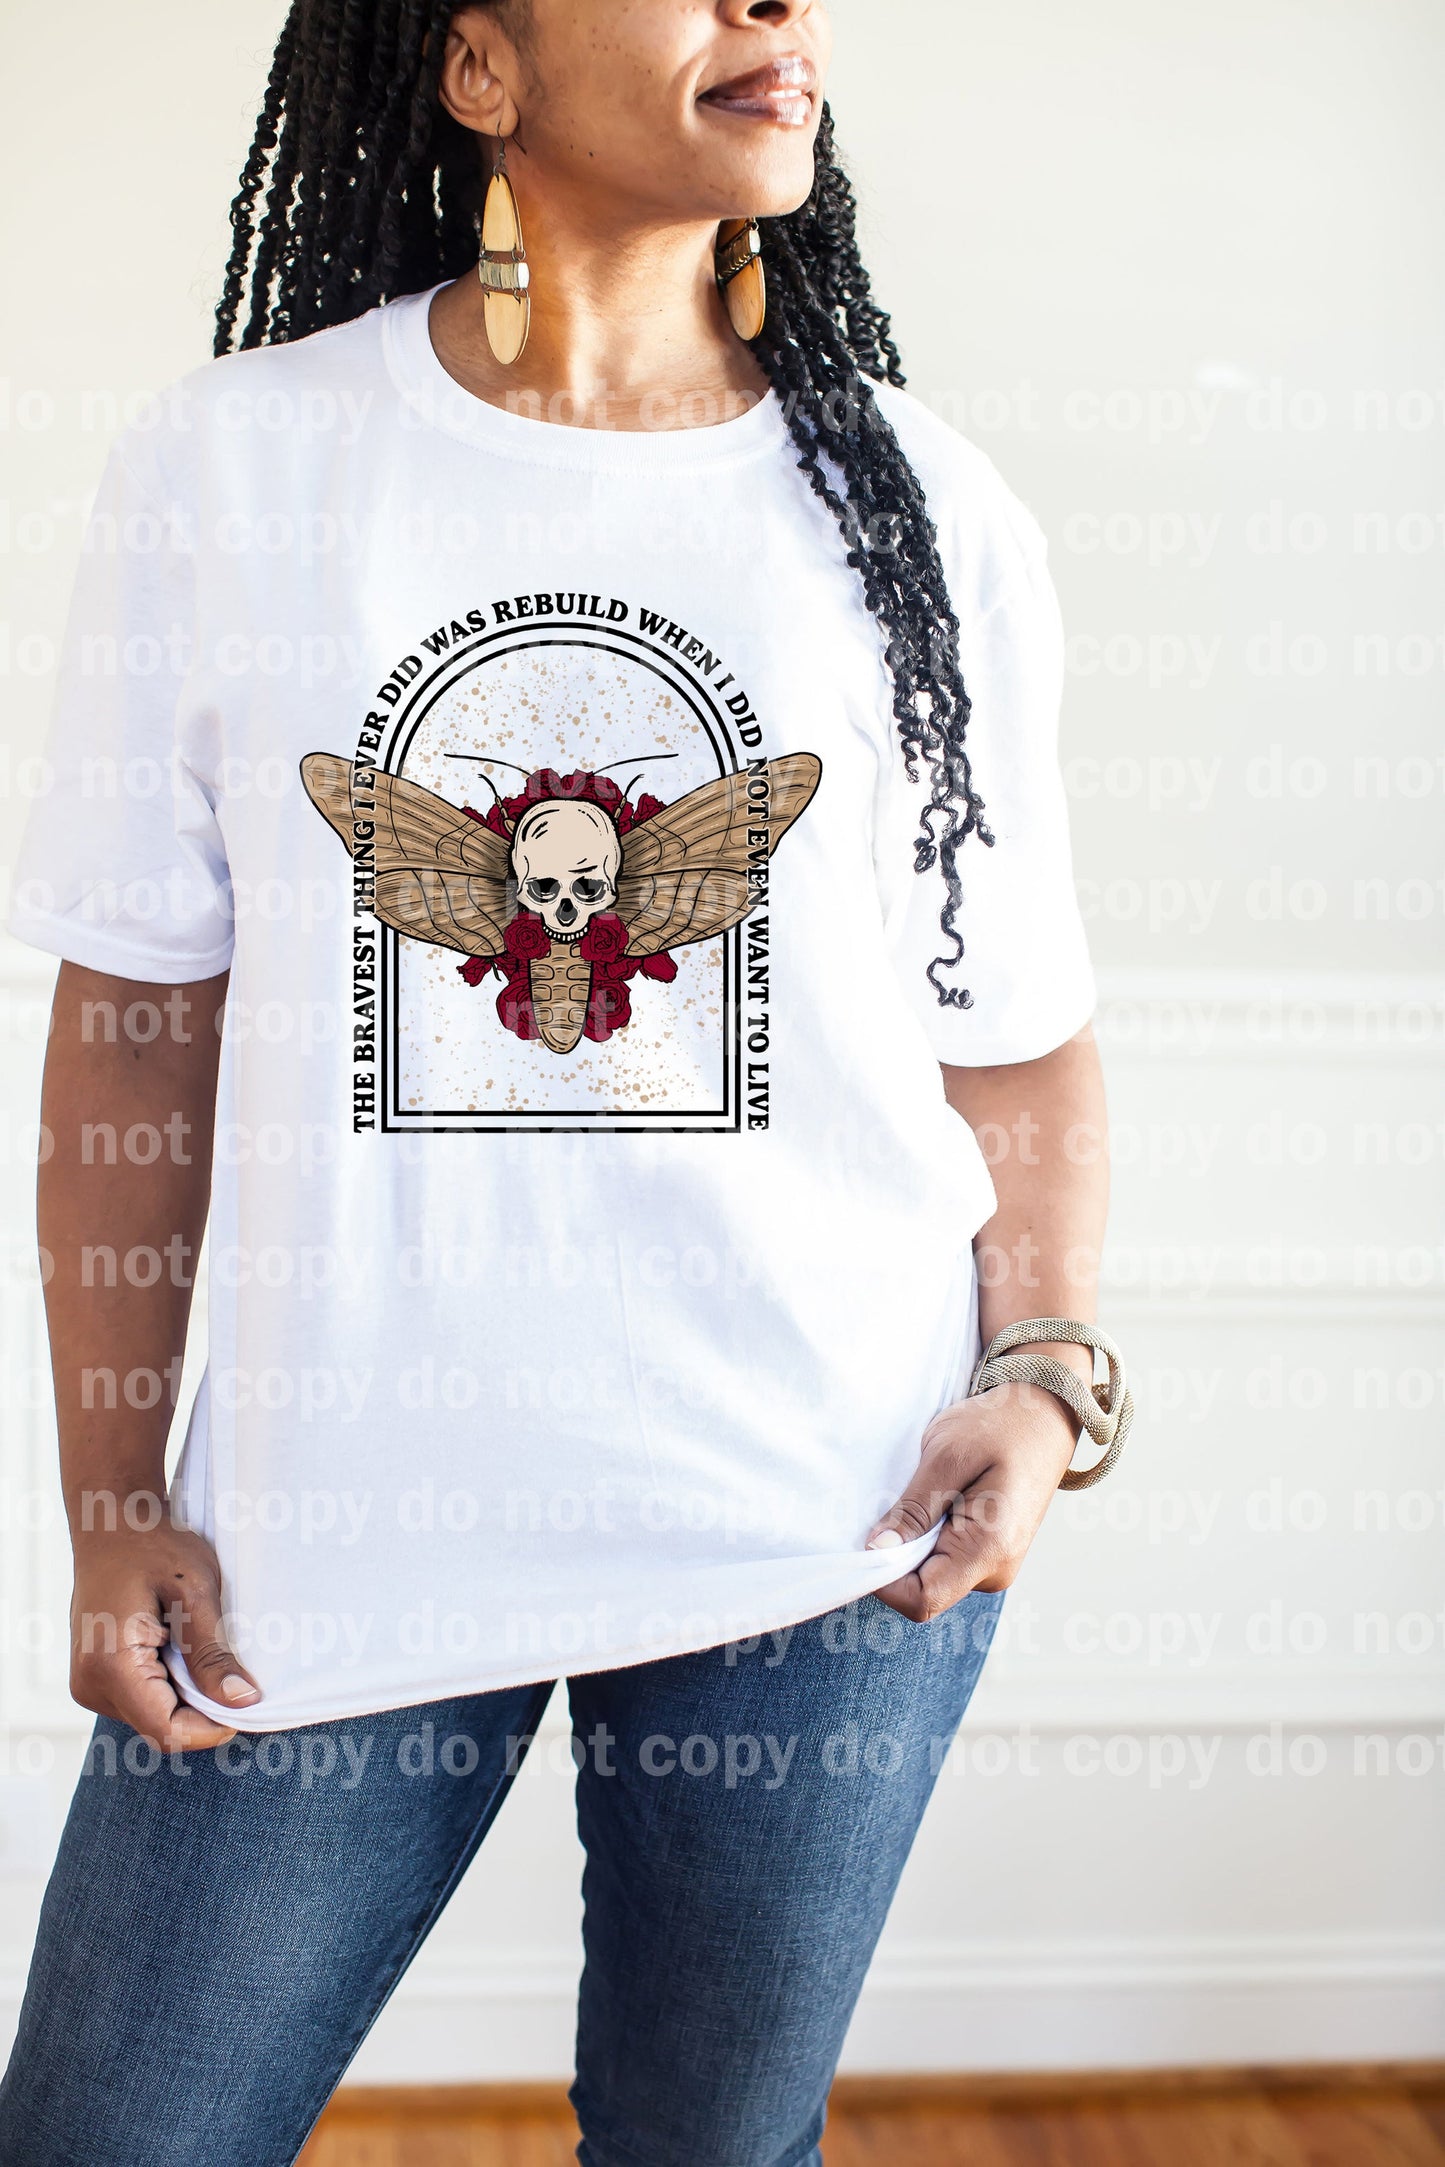 The Bravest Thing I Ever Did Was Rebuild with Pocket Option Dream Print or Sublimation Print